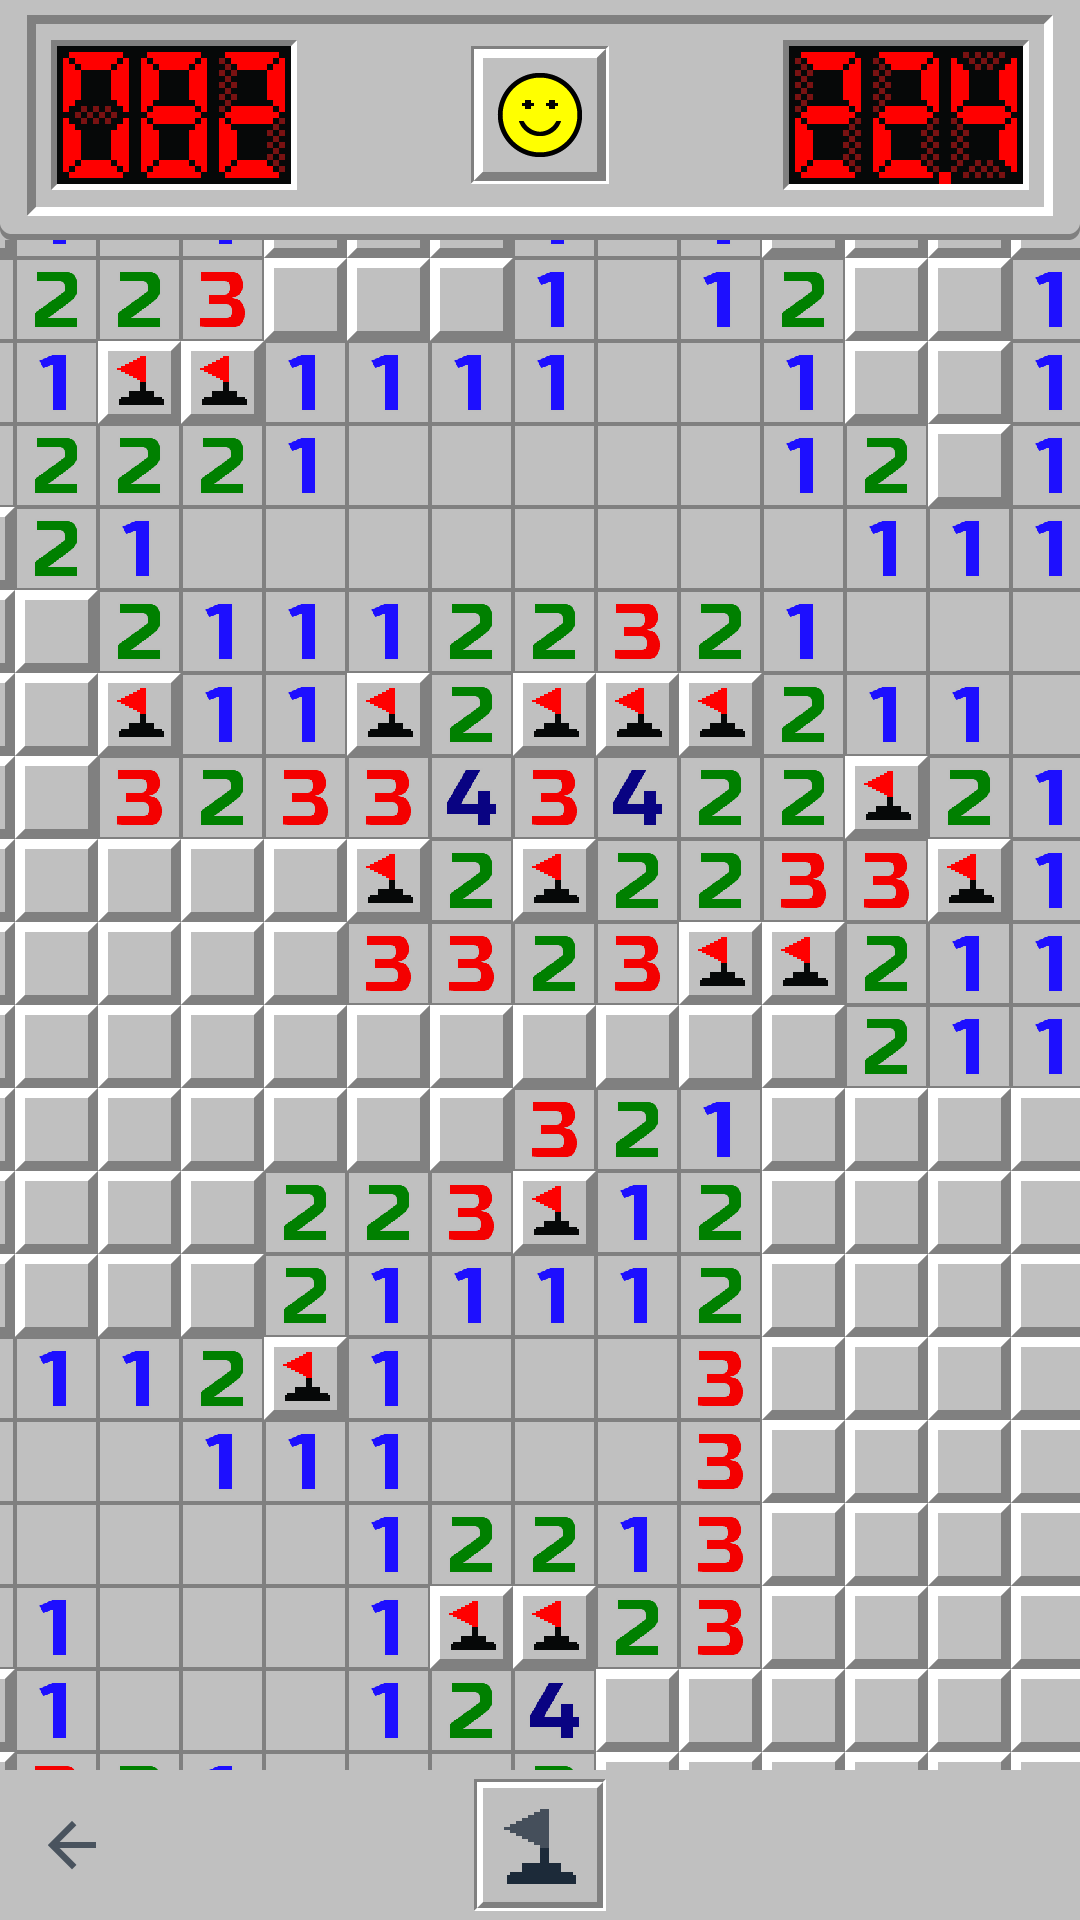 minesweeper mines classic puzzle app iphone games android apps io itch challenge apkpure screenshots gamedev spoiler androidcentral forums